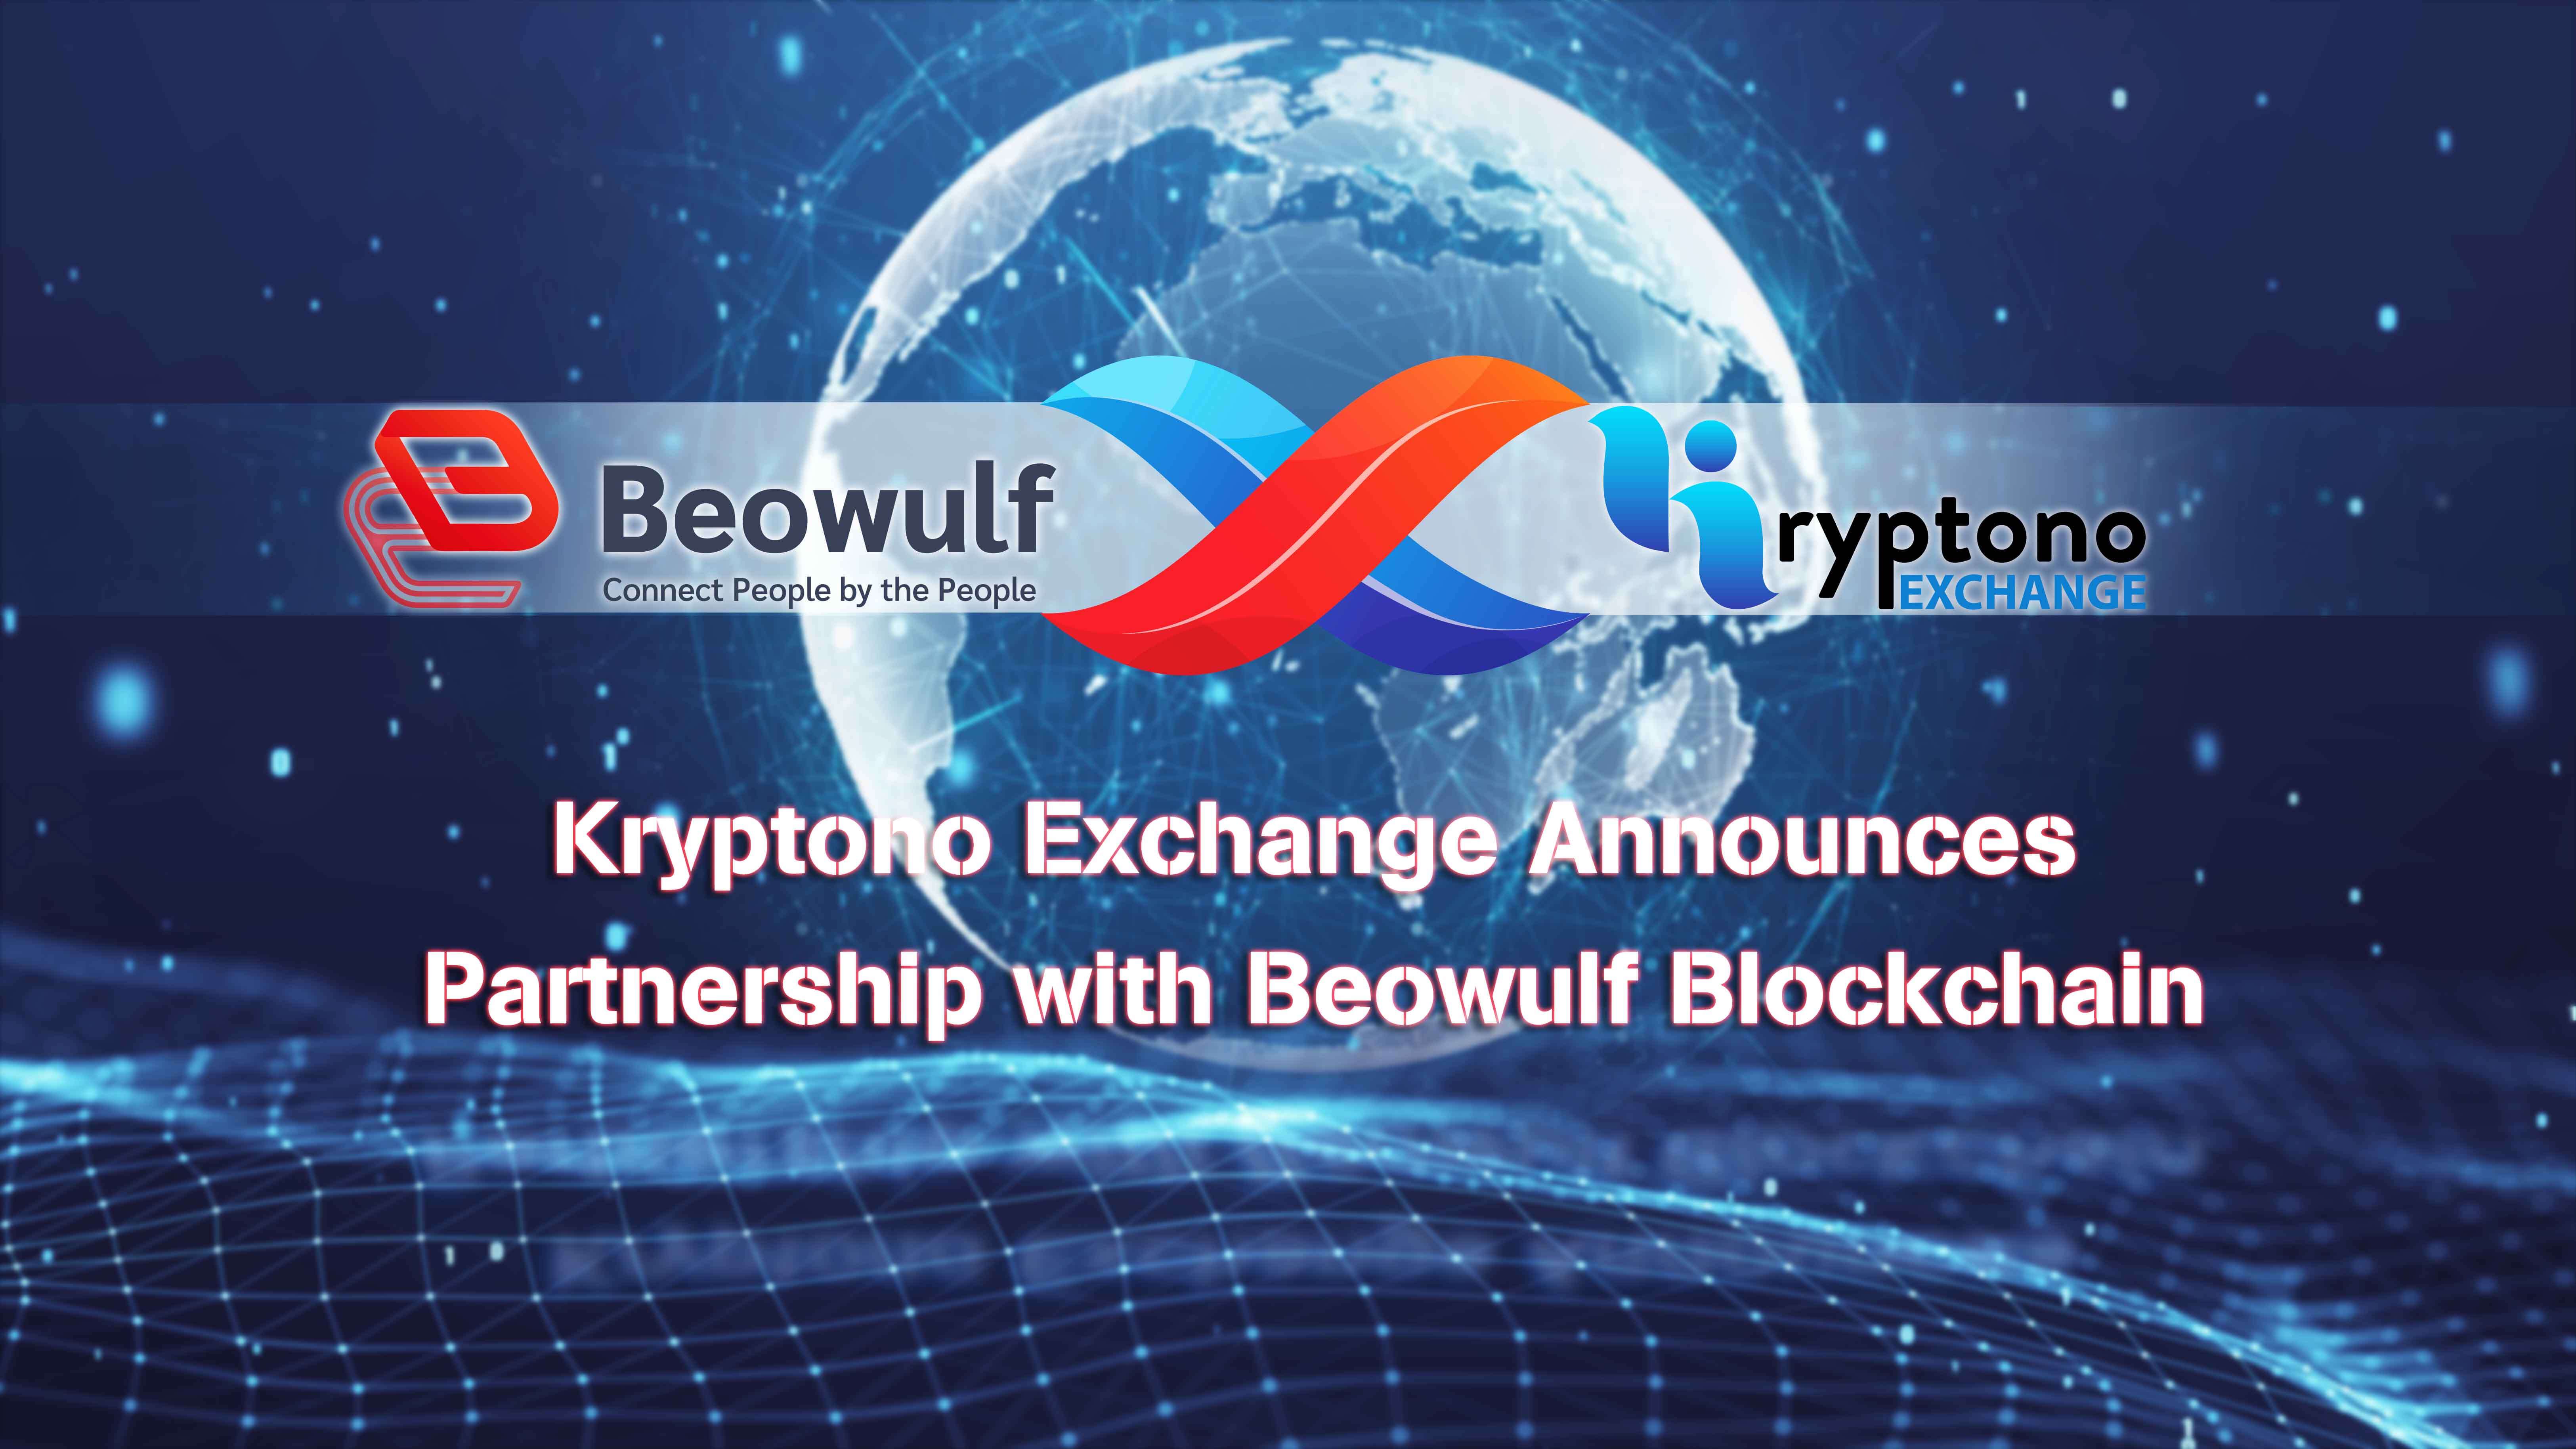 thecryptosight-kryptono-exchange-partners-with-beowulf-blockchain-to-use-real-time-customer-support-via-quickom.jpg